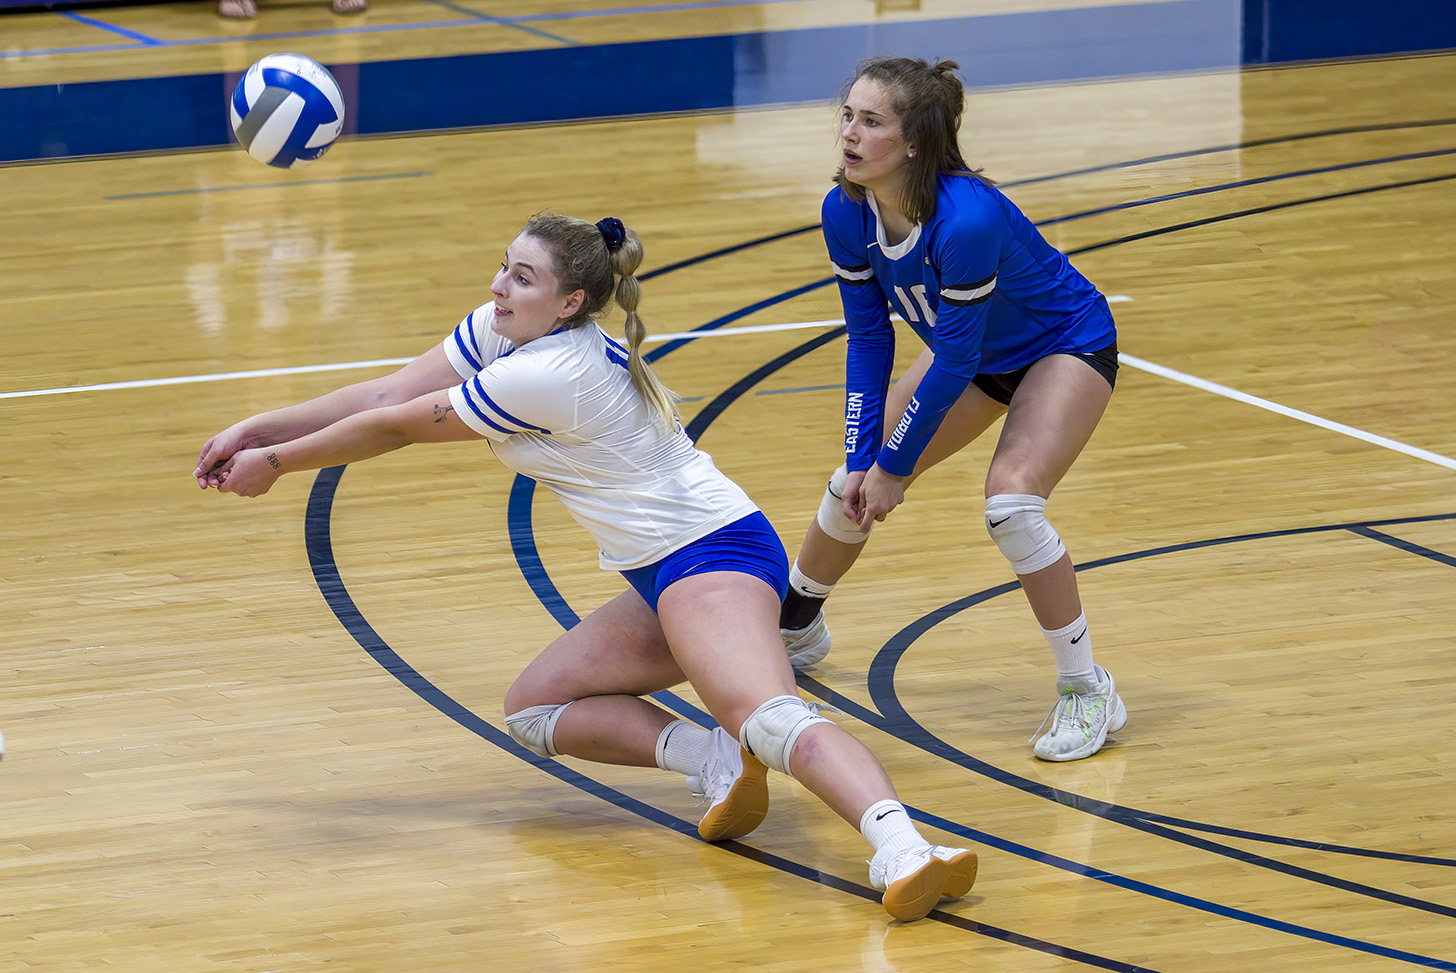 Women's volleyball team beats Polk, places third in state tournament